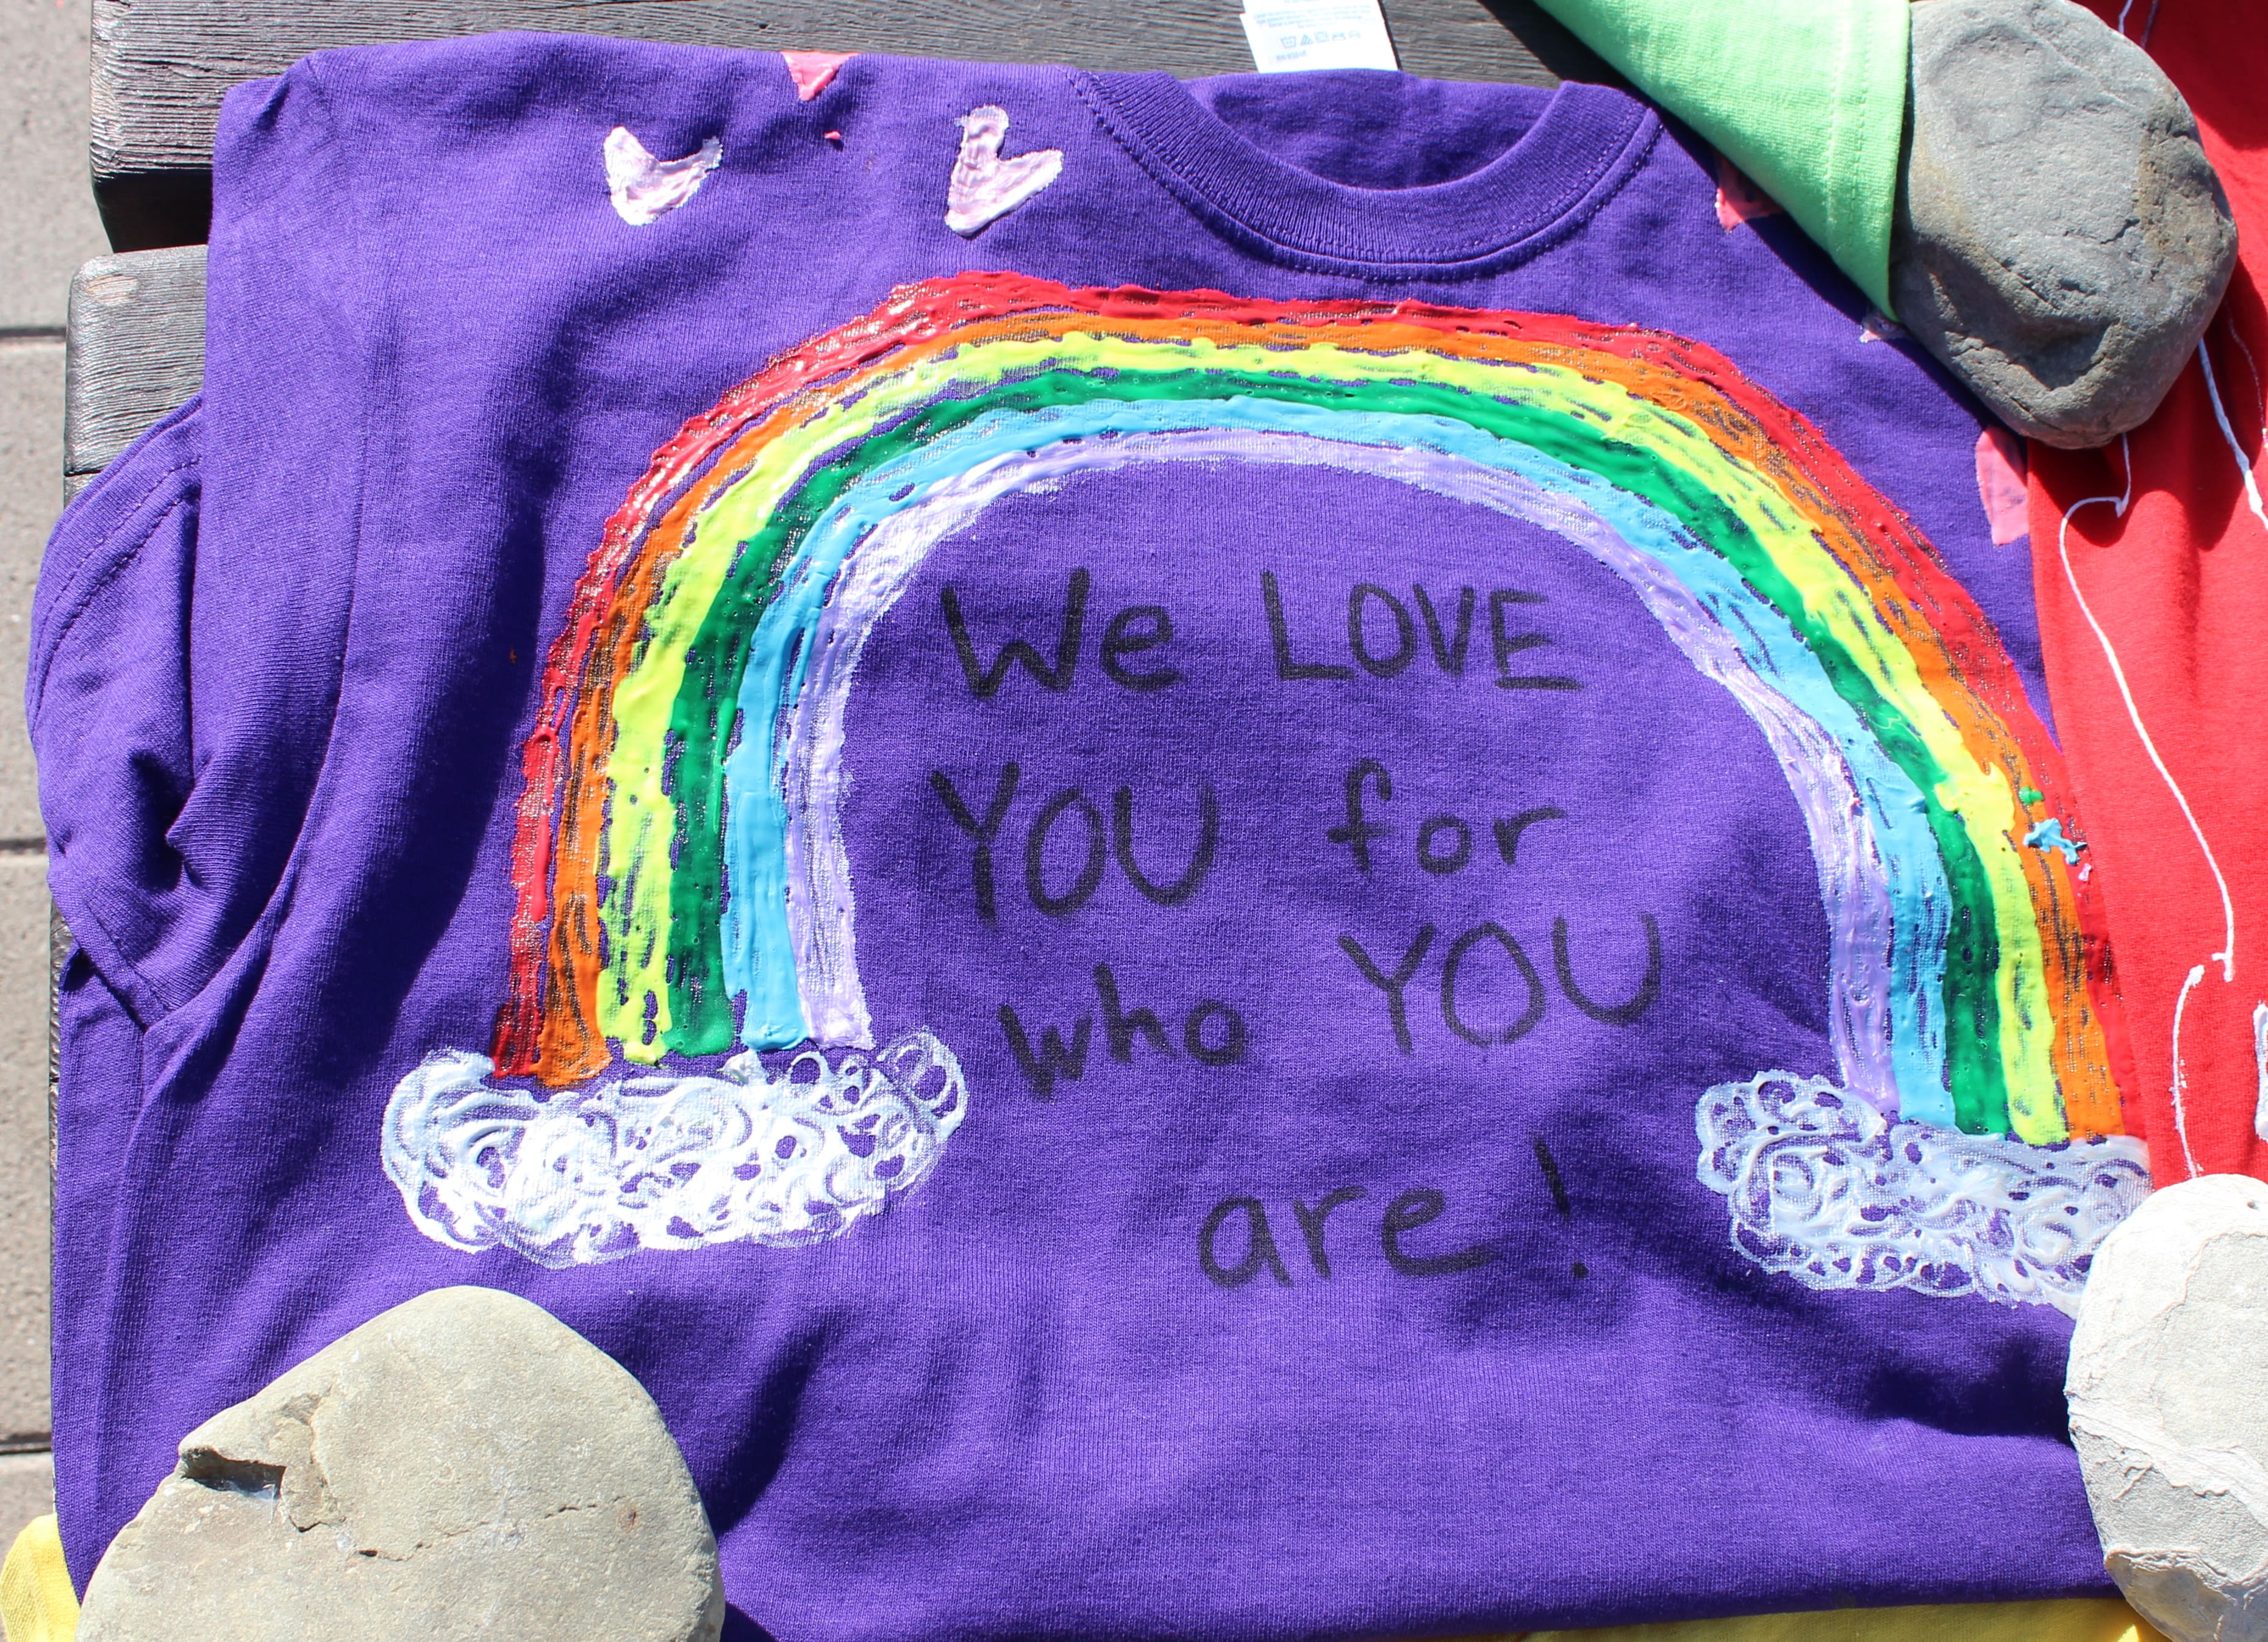 Purple t-shirt with text that says "We Love YOU for who YOU are!" underneath a painted on rainbow